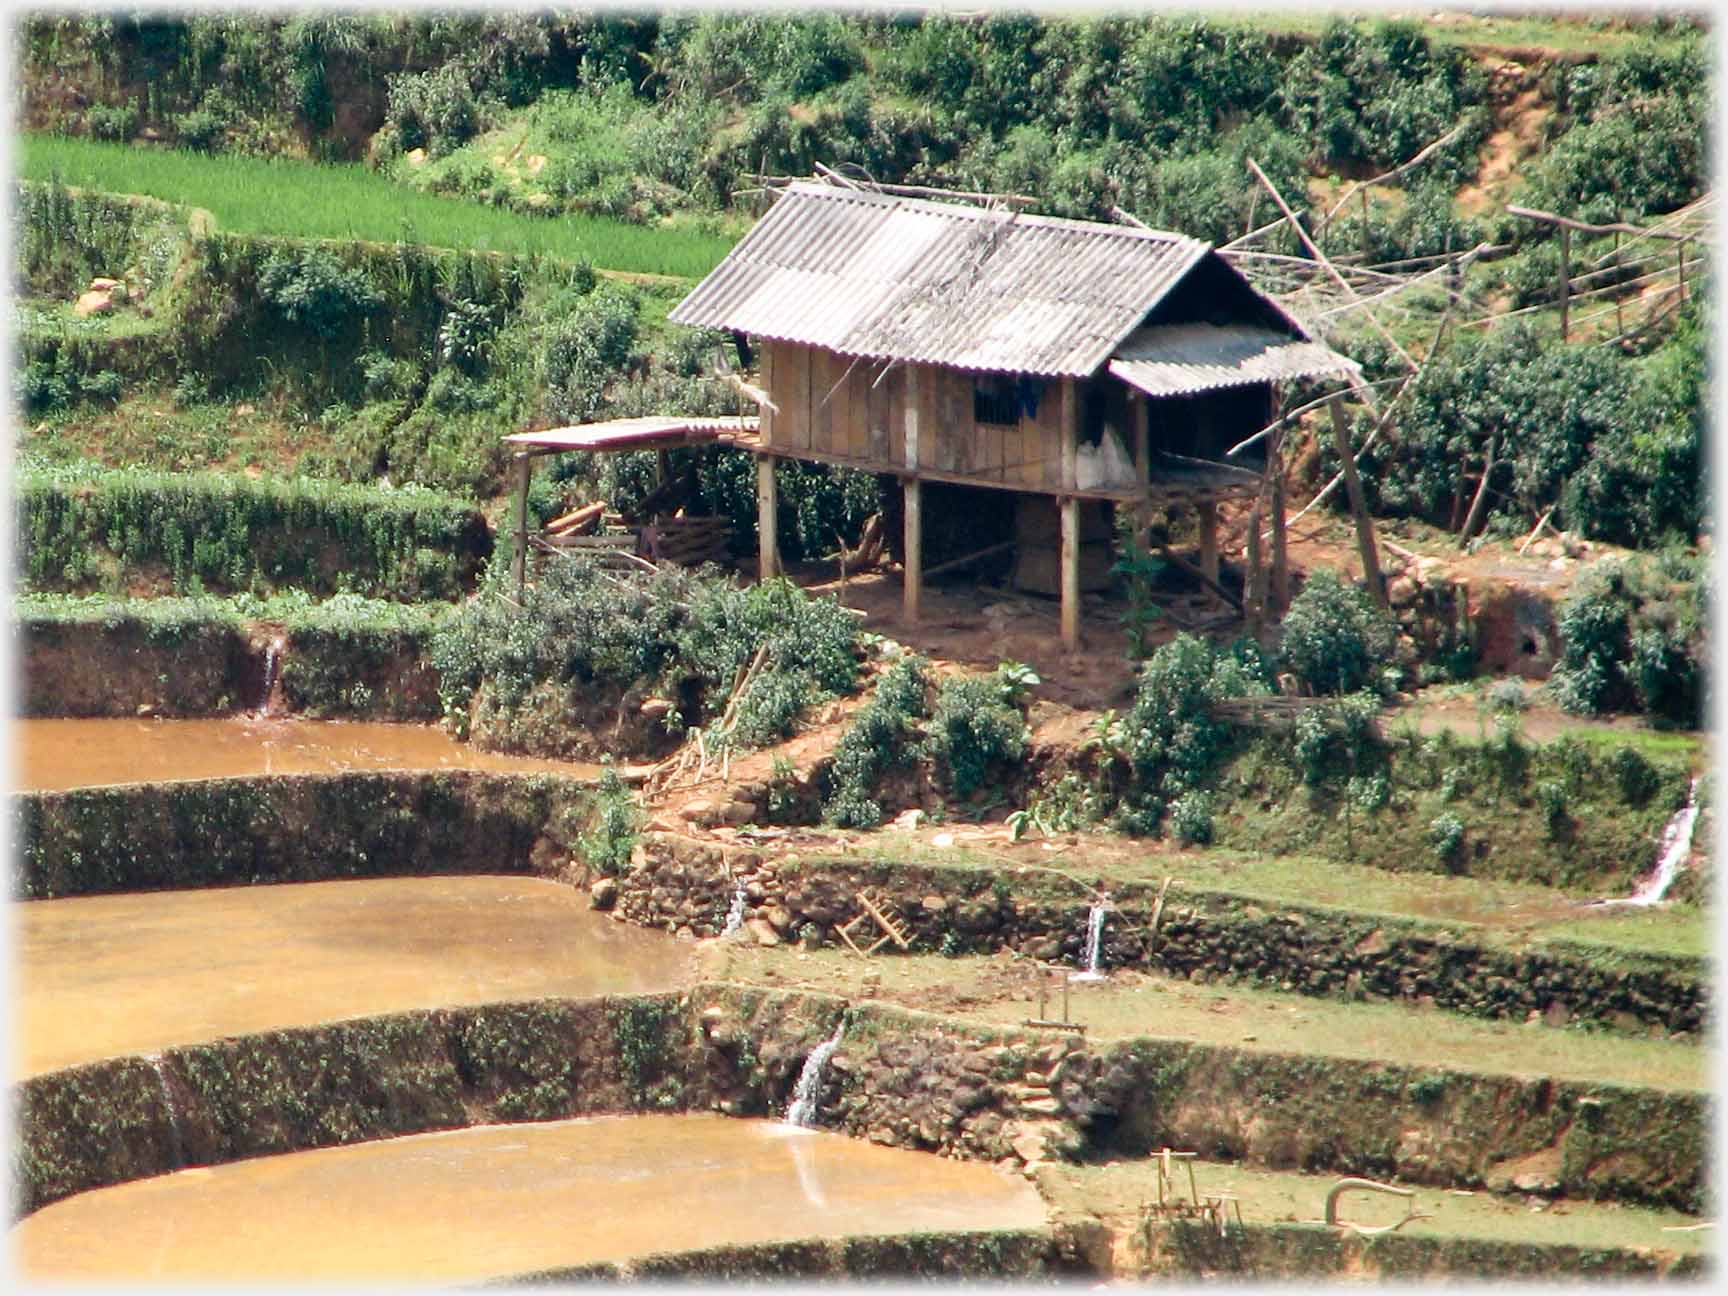 Stilted house on terraces with the spouts of water that drain each level in view.